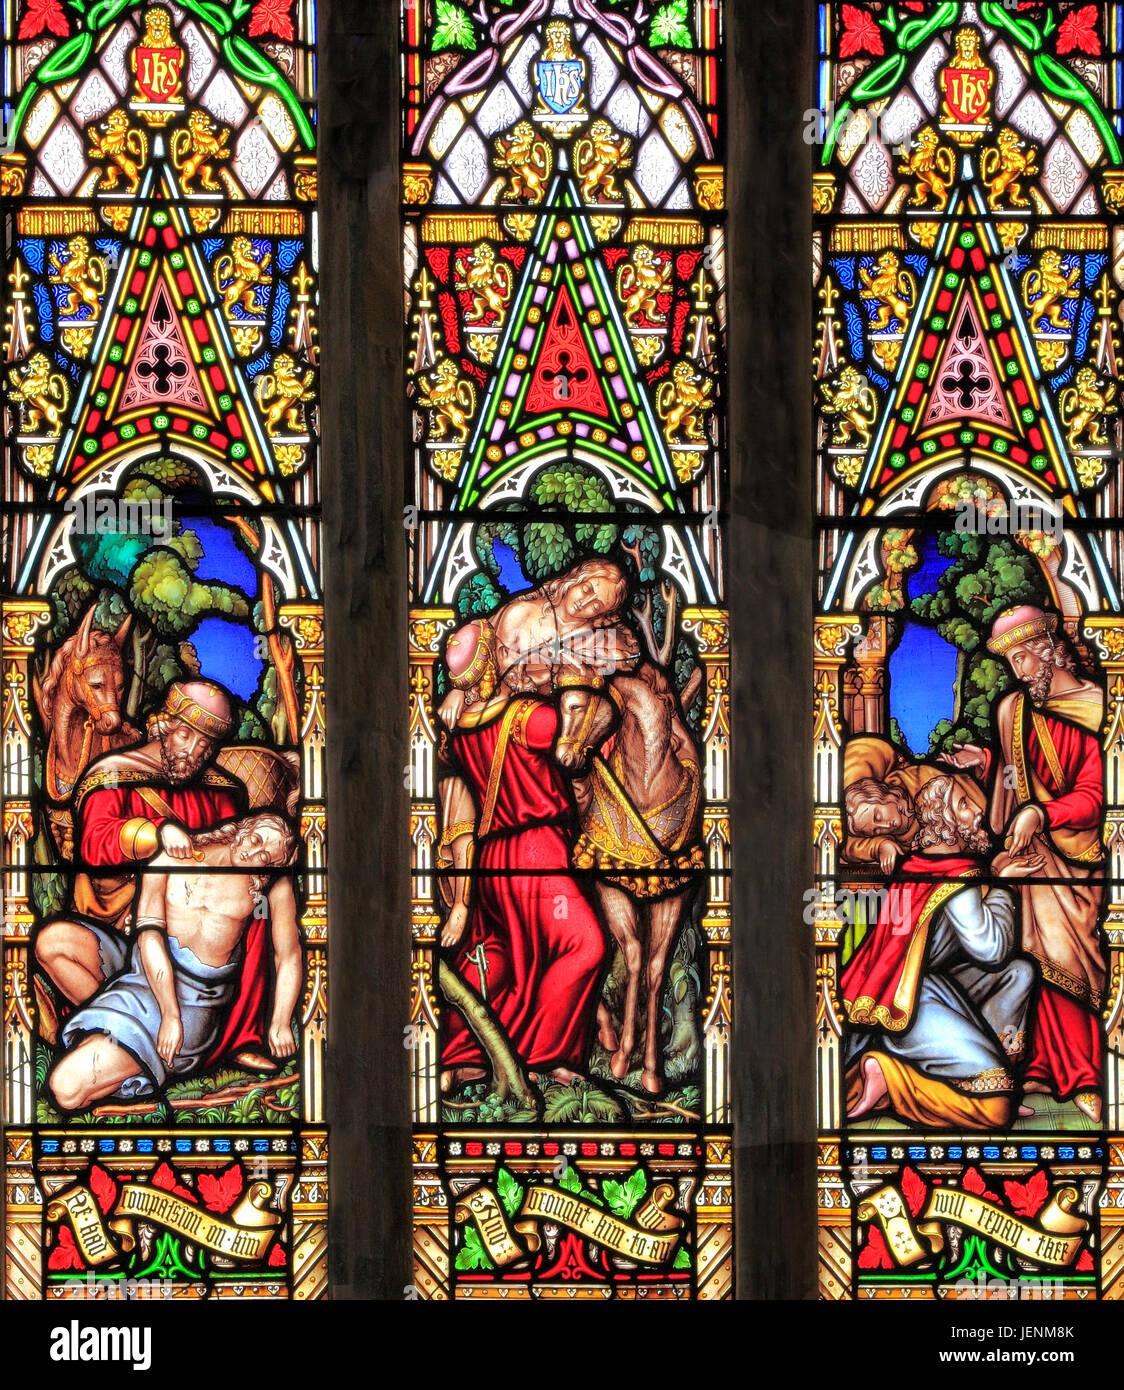 Good Samaritan Parable, tending traveller's injuries, carring him to an Inn, for care, paying the innkeeper, stained glass window, by William Warringt Stock Photo